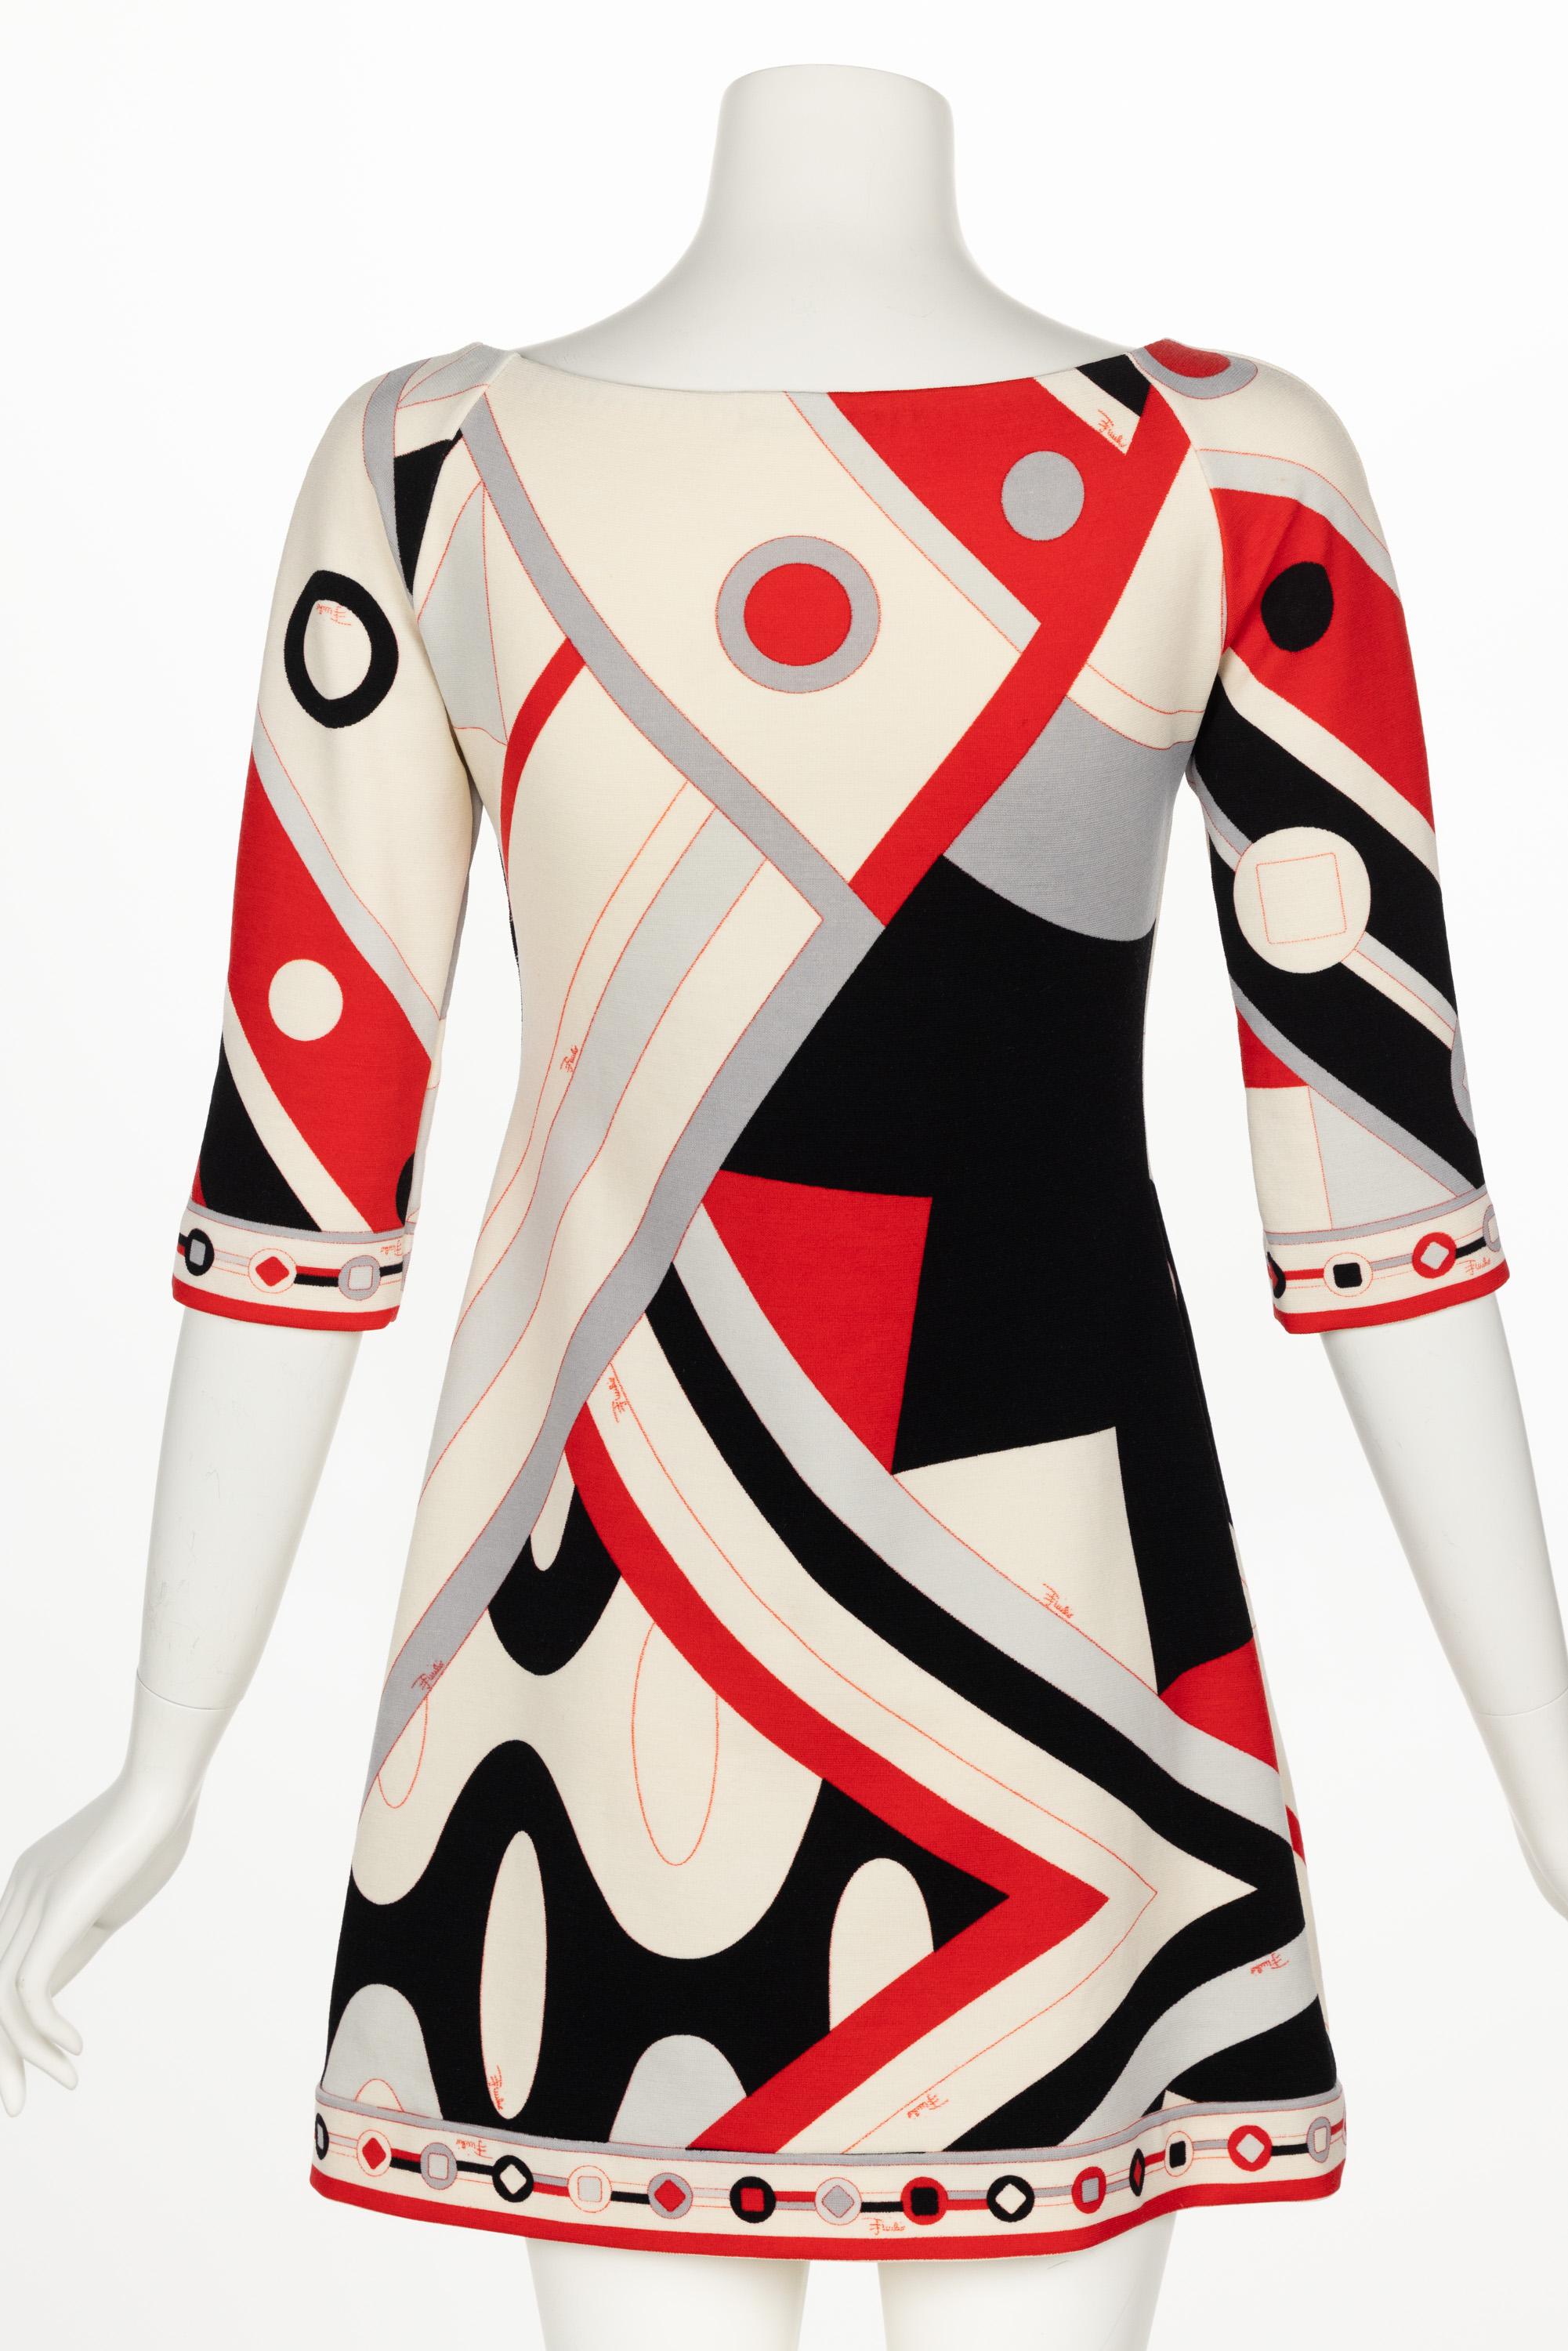 Vintage Pucci Wool Geometric Print Mini Dress In Good Condition For Sale In Boca Raton, FL